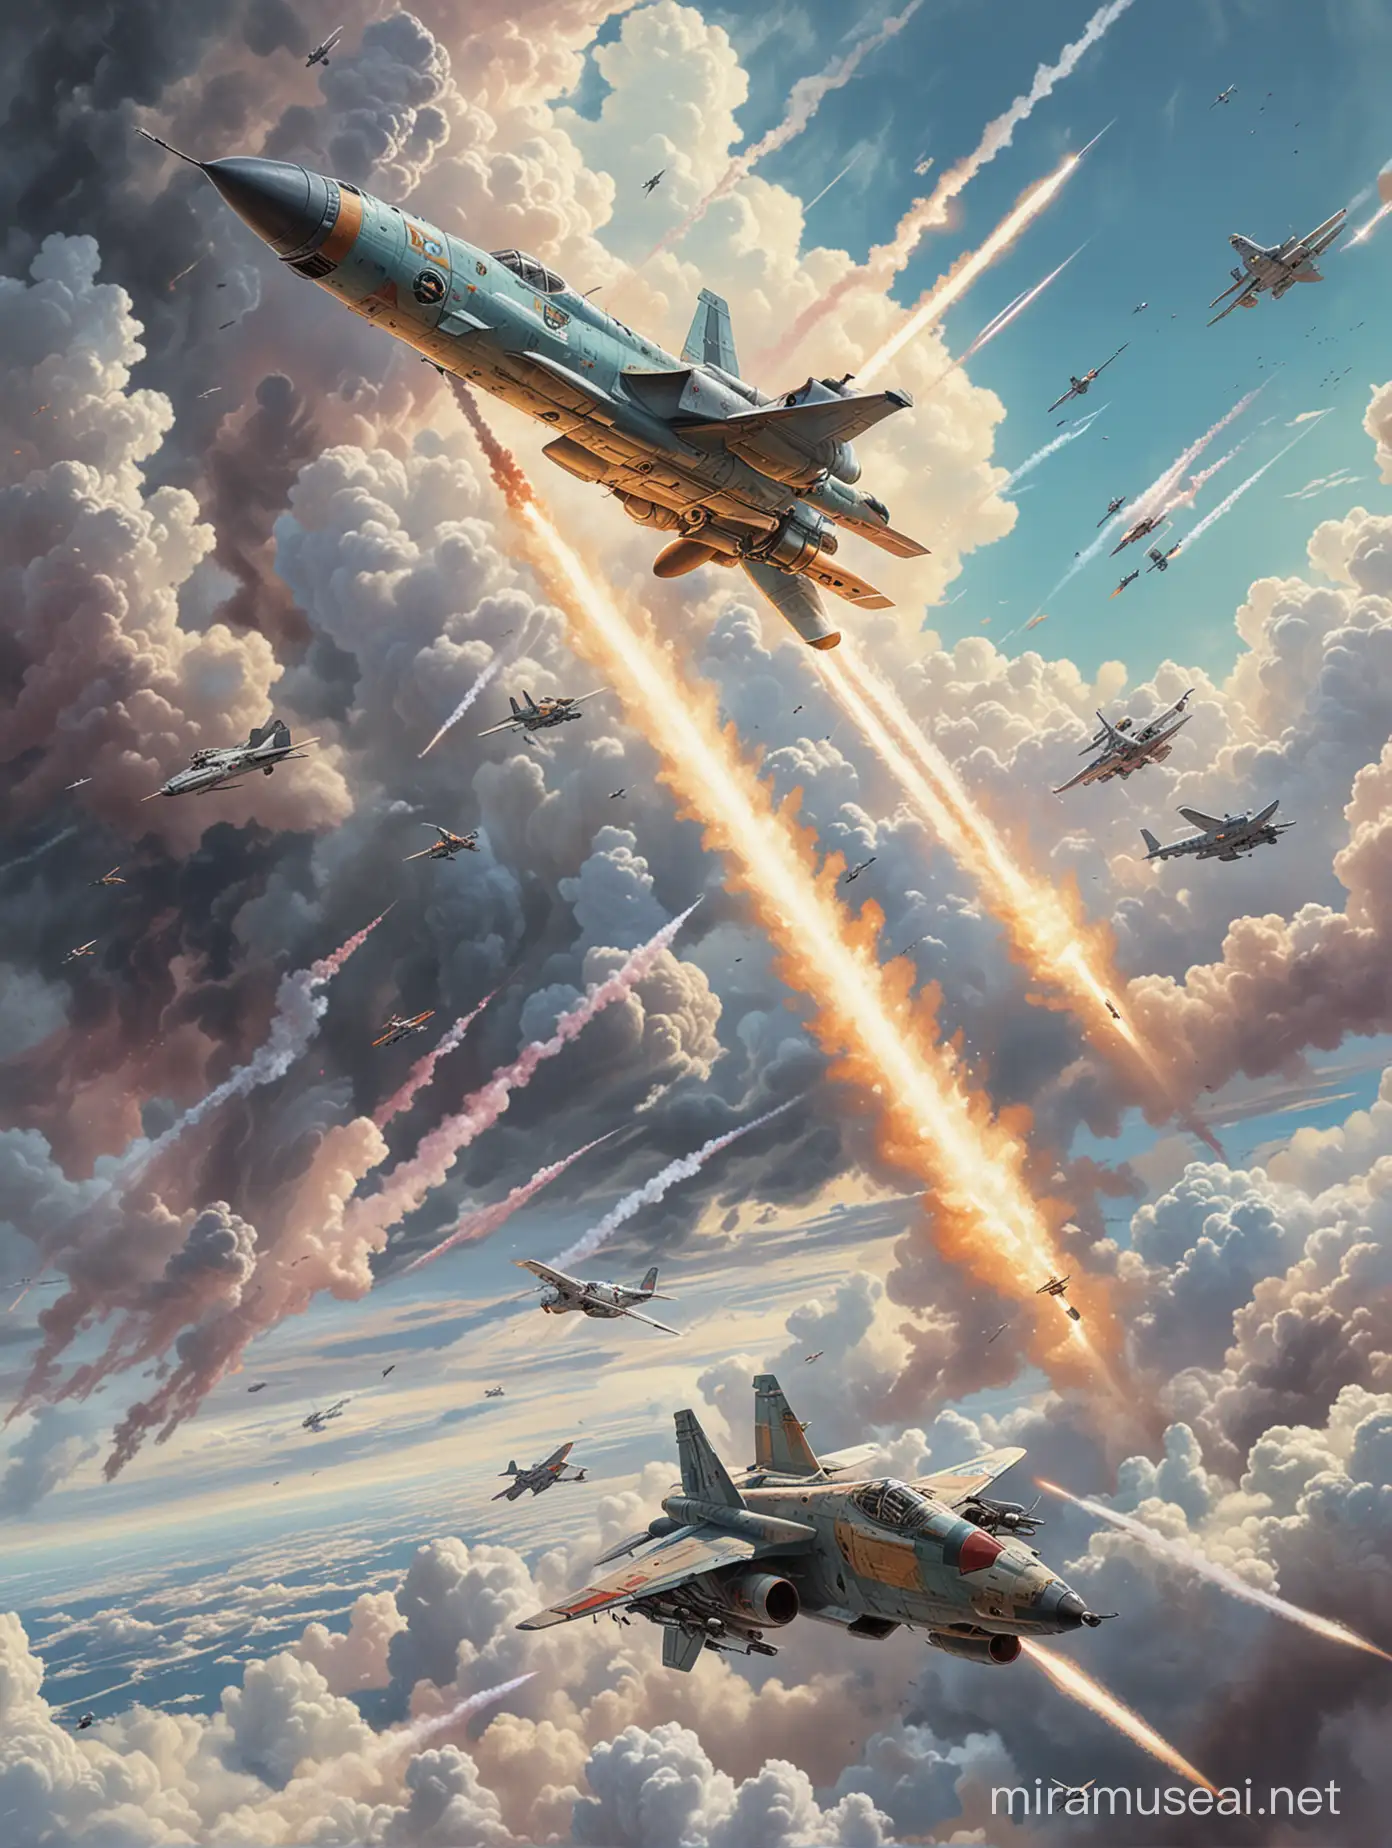 Highly detailed painting, wide view, a dogfight in a cloudy sky between (((only two))) science fiction rocket ships, one rocket ship fires a laser beam at the other, otherwise the sky is empty except for clouds, use muted pastel colors only, high quality